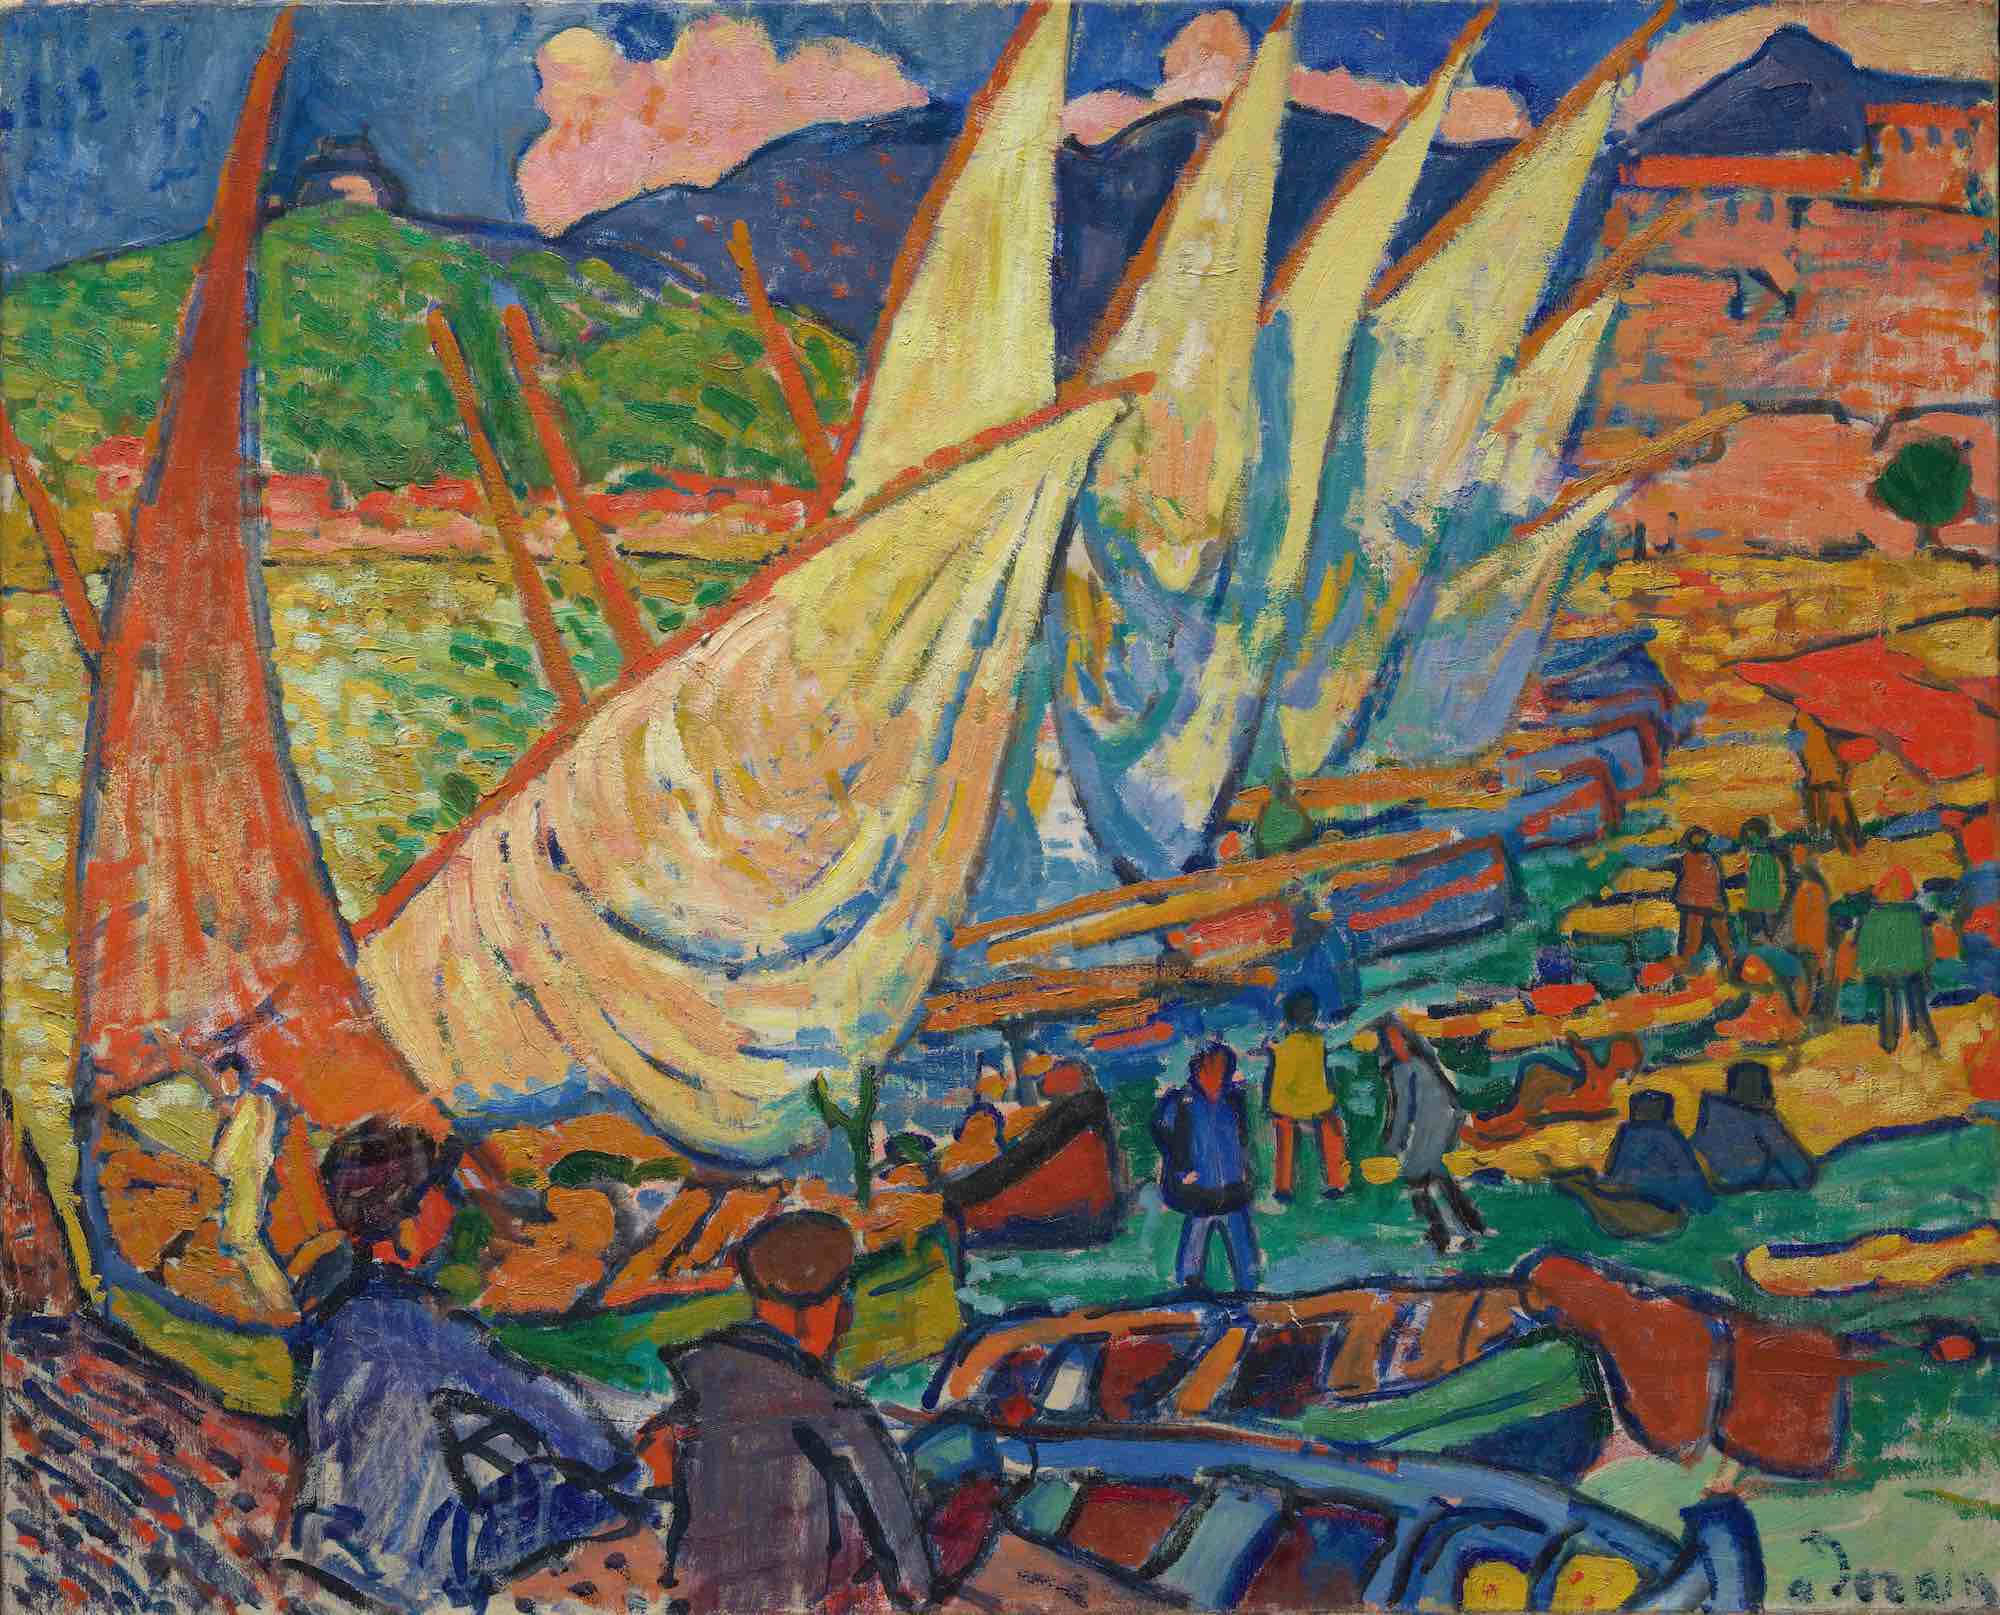 André Derain, Fishing Boats, Collioure, 1905, oil on canvas, 31 7/8 x 39 3/8 inches (Metropolitan Museum of Art, New York © 2023 Artists Rights Society, New York / ADAGP Paris)